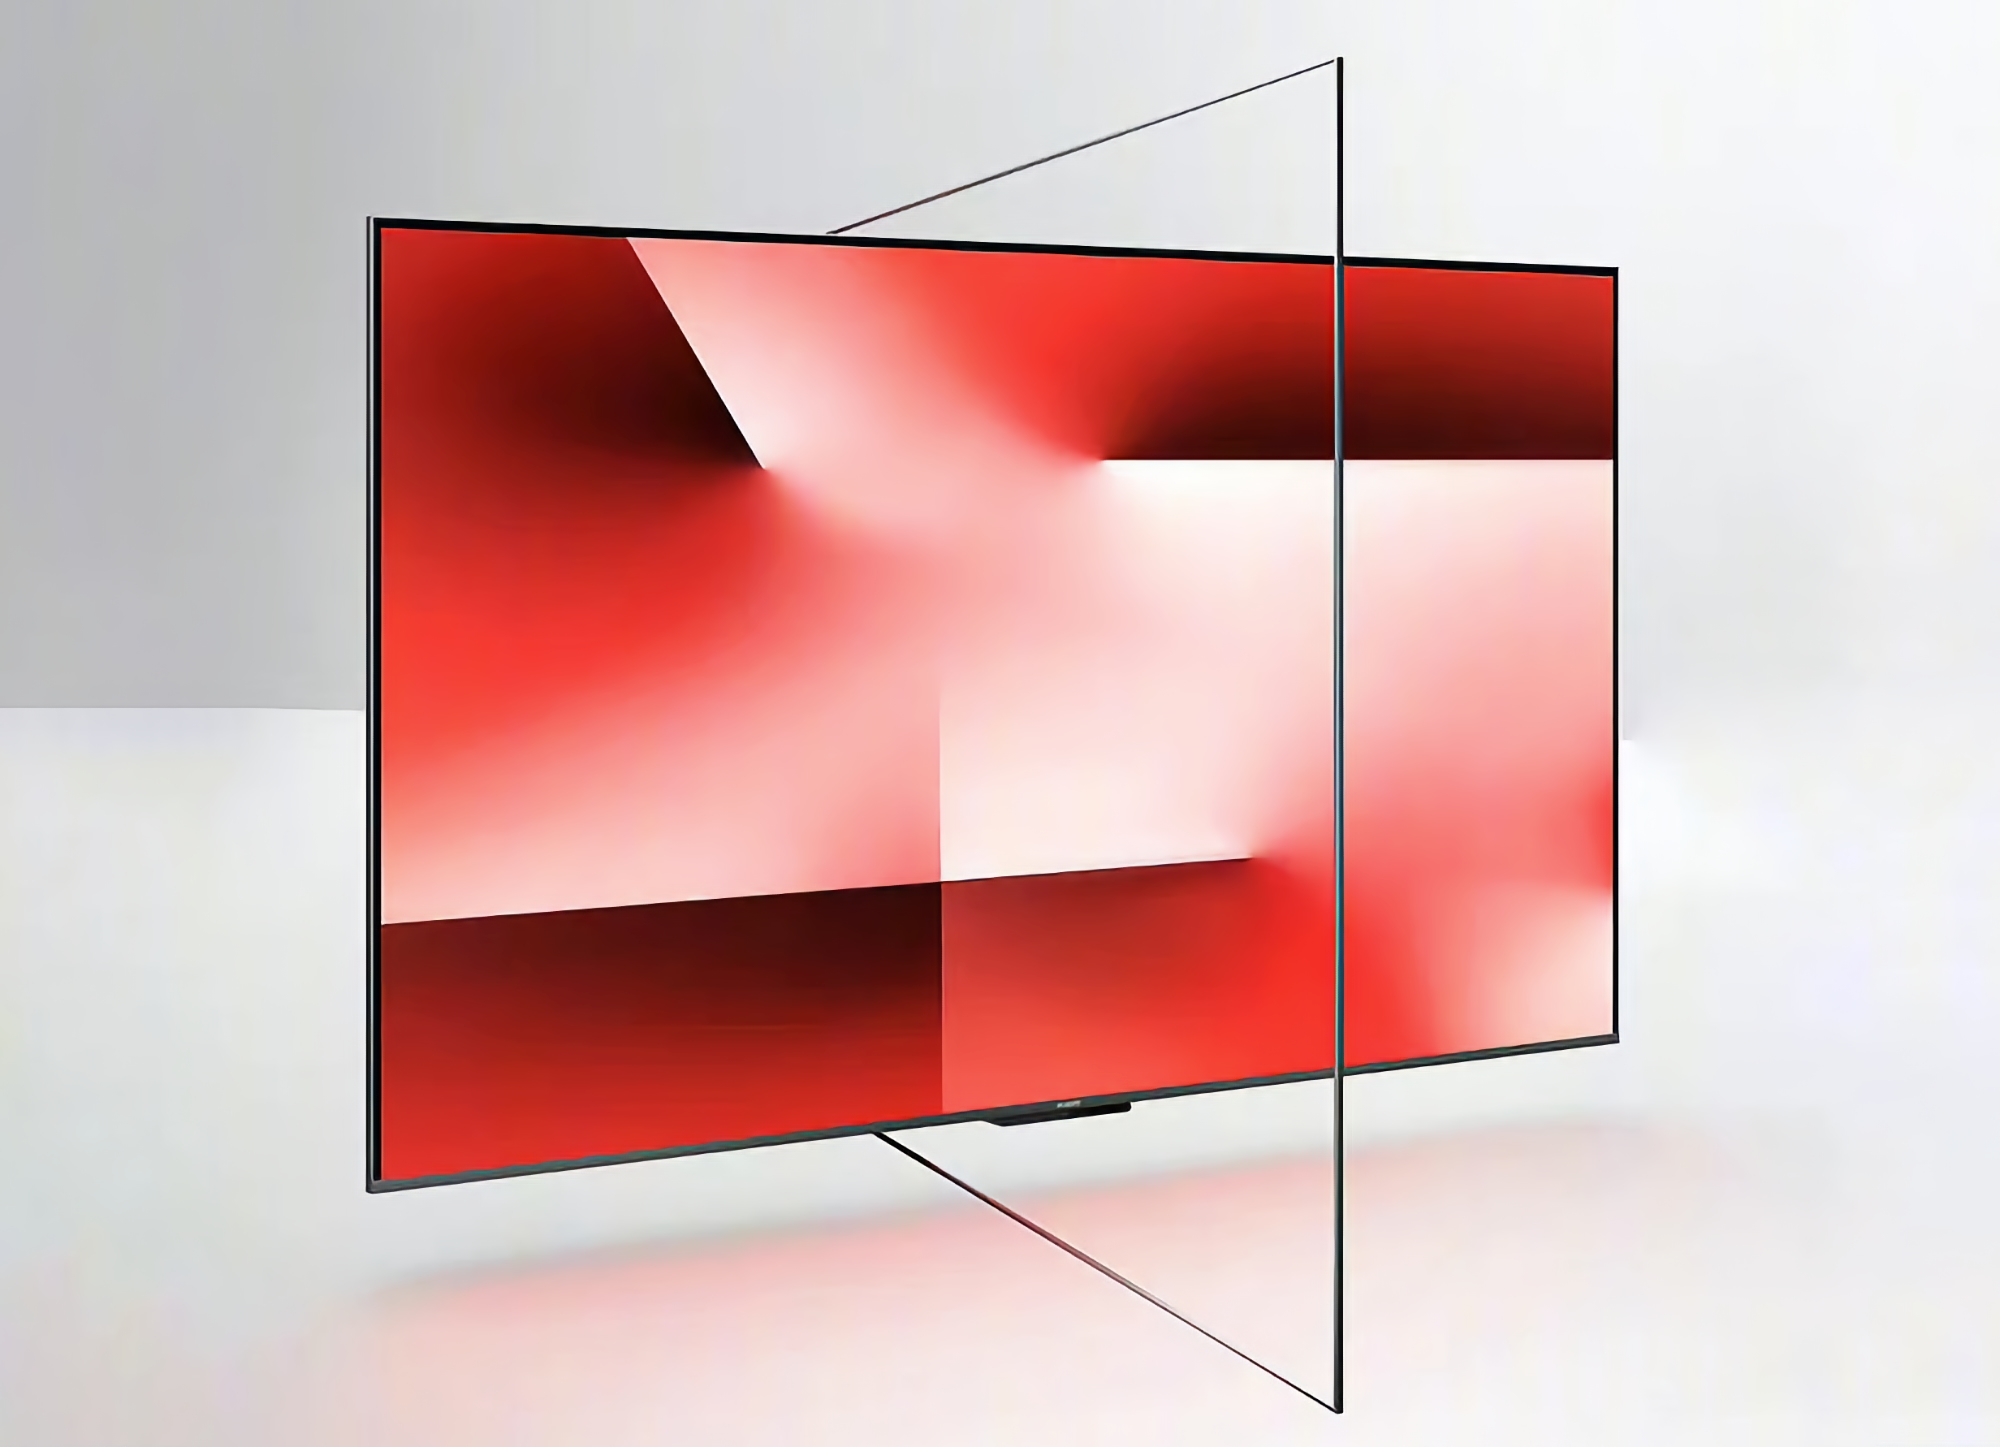 Huawei showed the new Vision Smart Screen: smart TV with 75-86" screen and 120 Hz support 